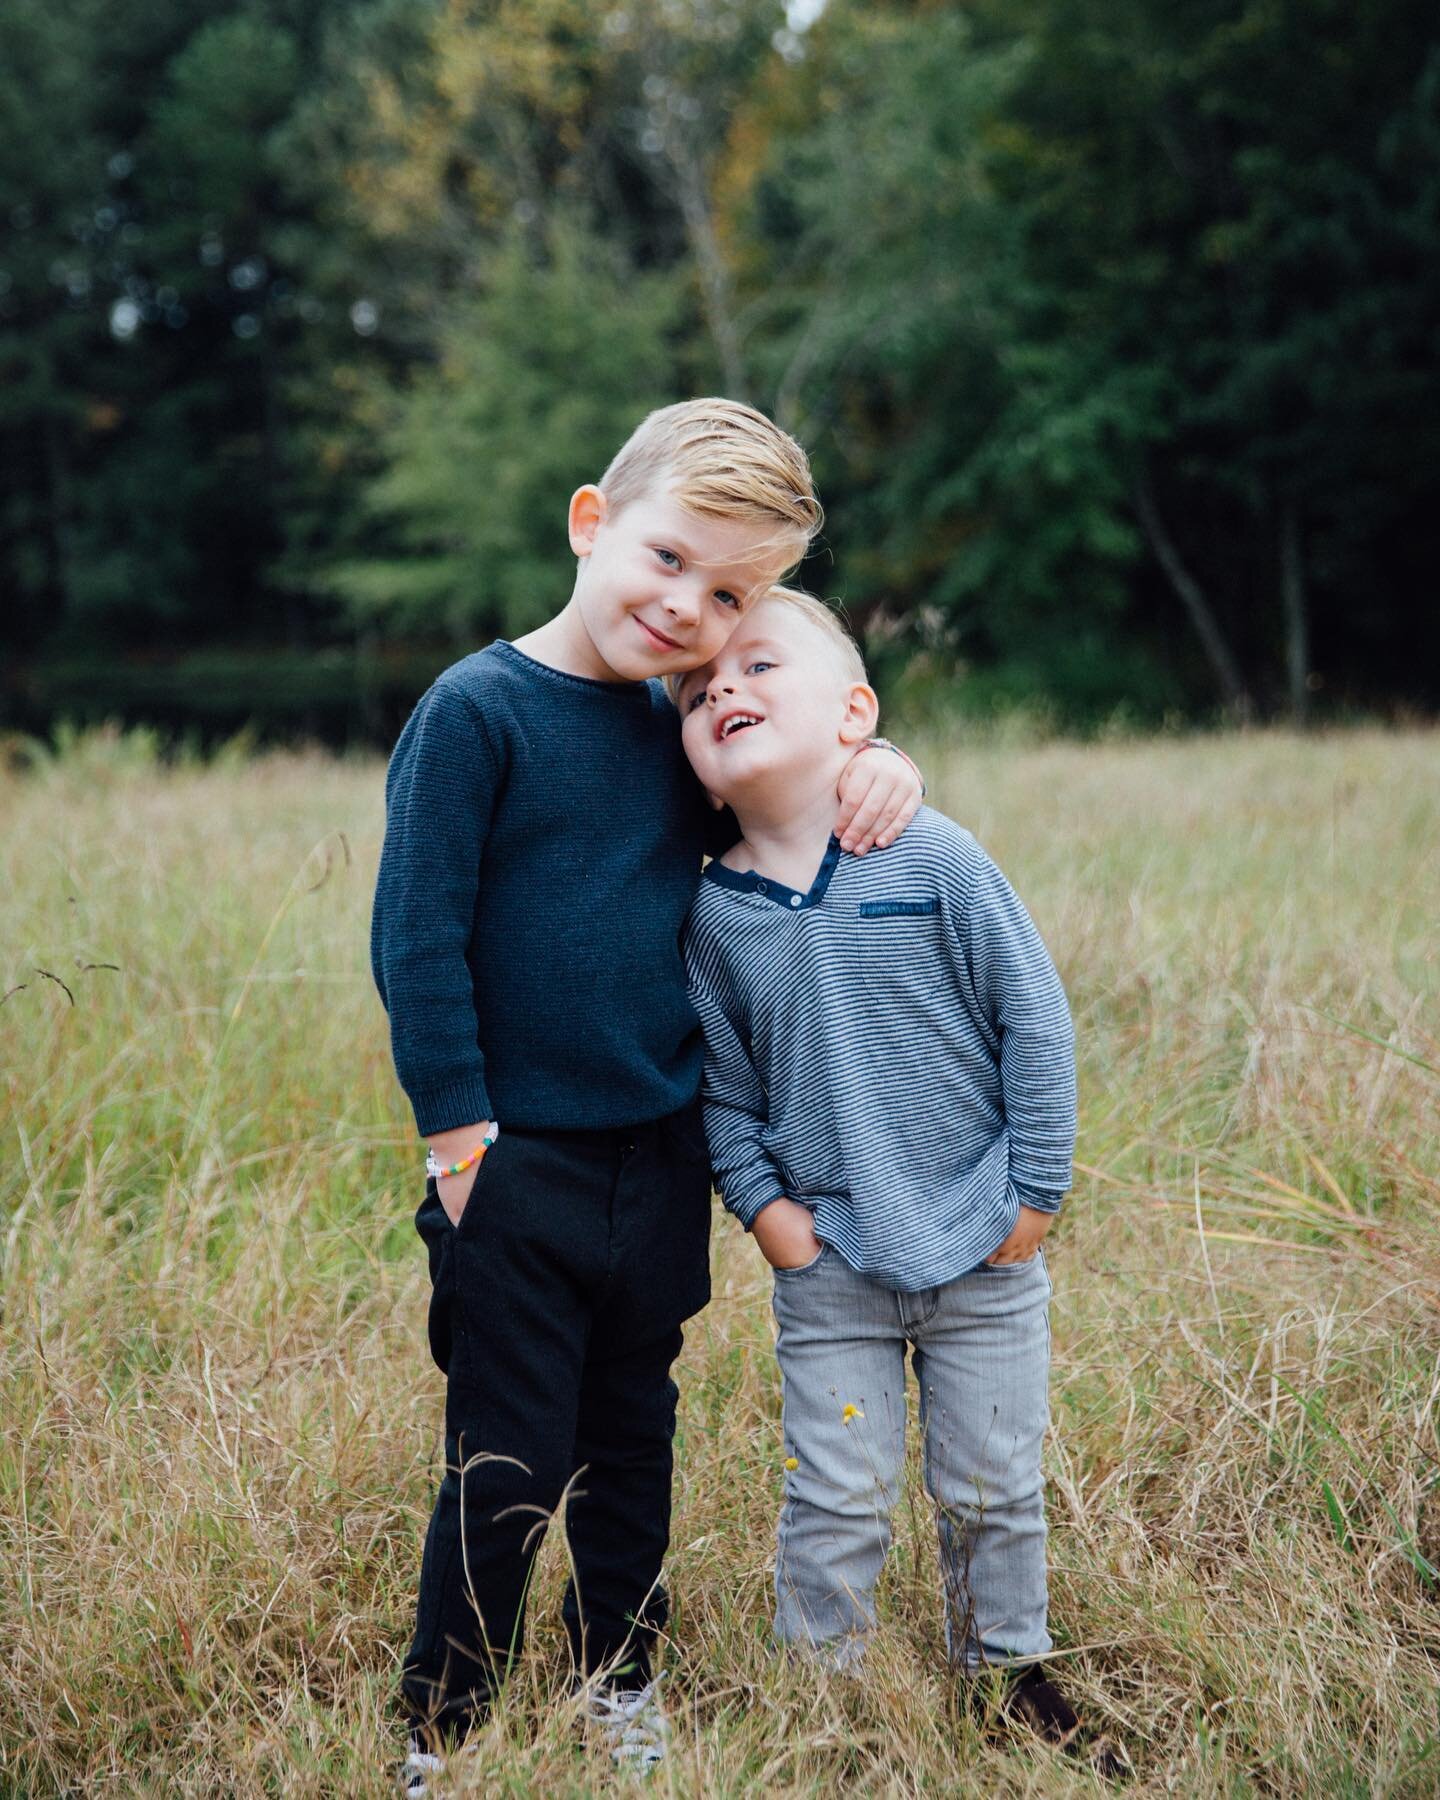 I had tons of fun shooting so many amazing clients this weekend in Charlotte. But these boys were by far my favorite! ❤️❤️❤️ #boymom #letthembelittle #zarakids